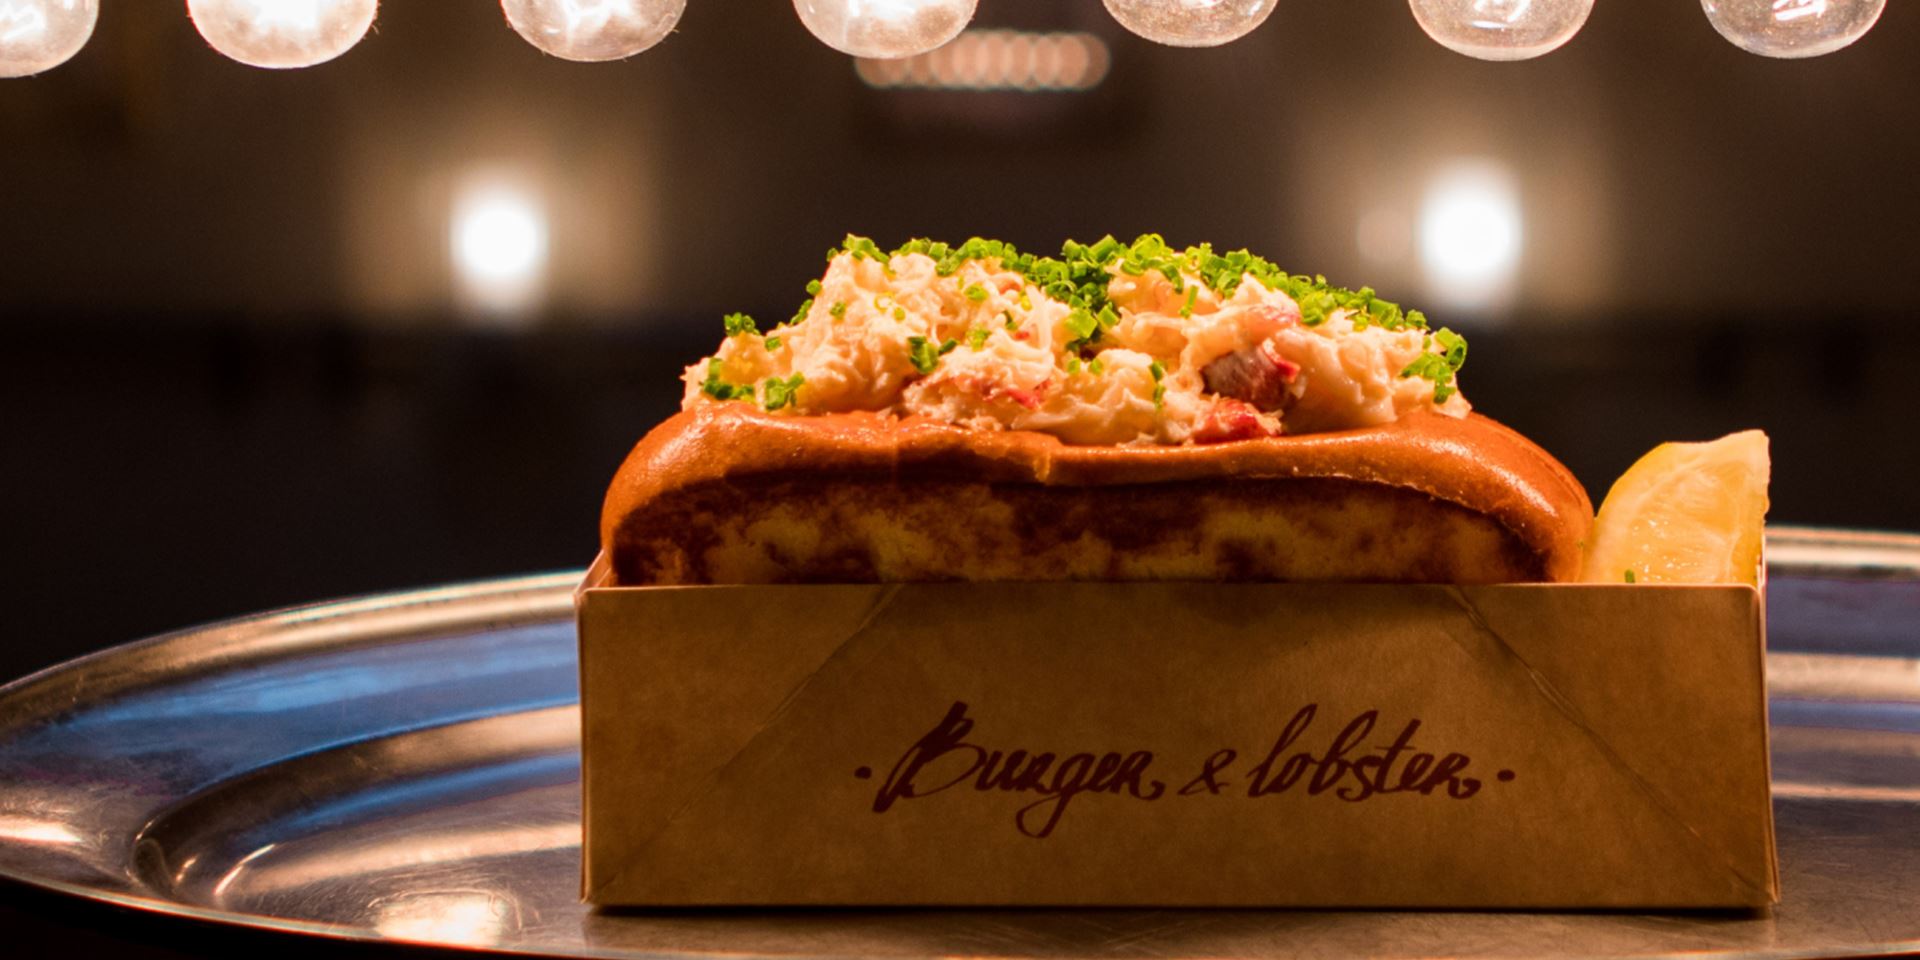 Burger and lobster roll